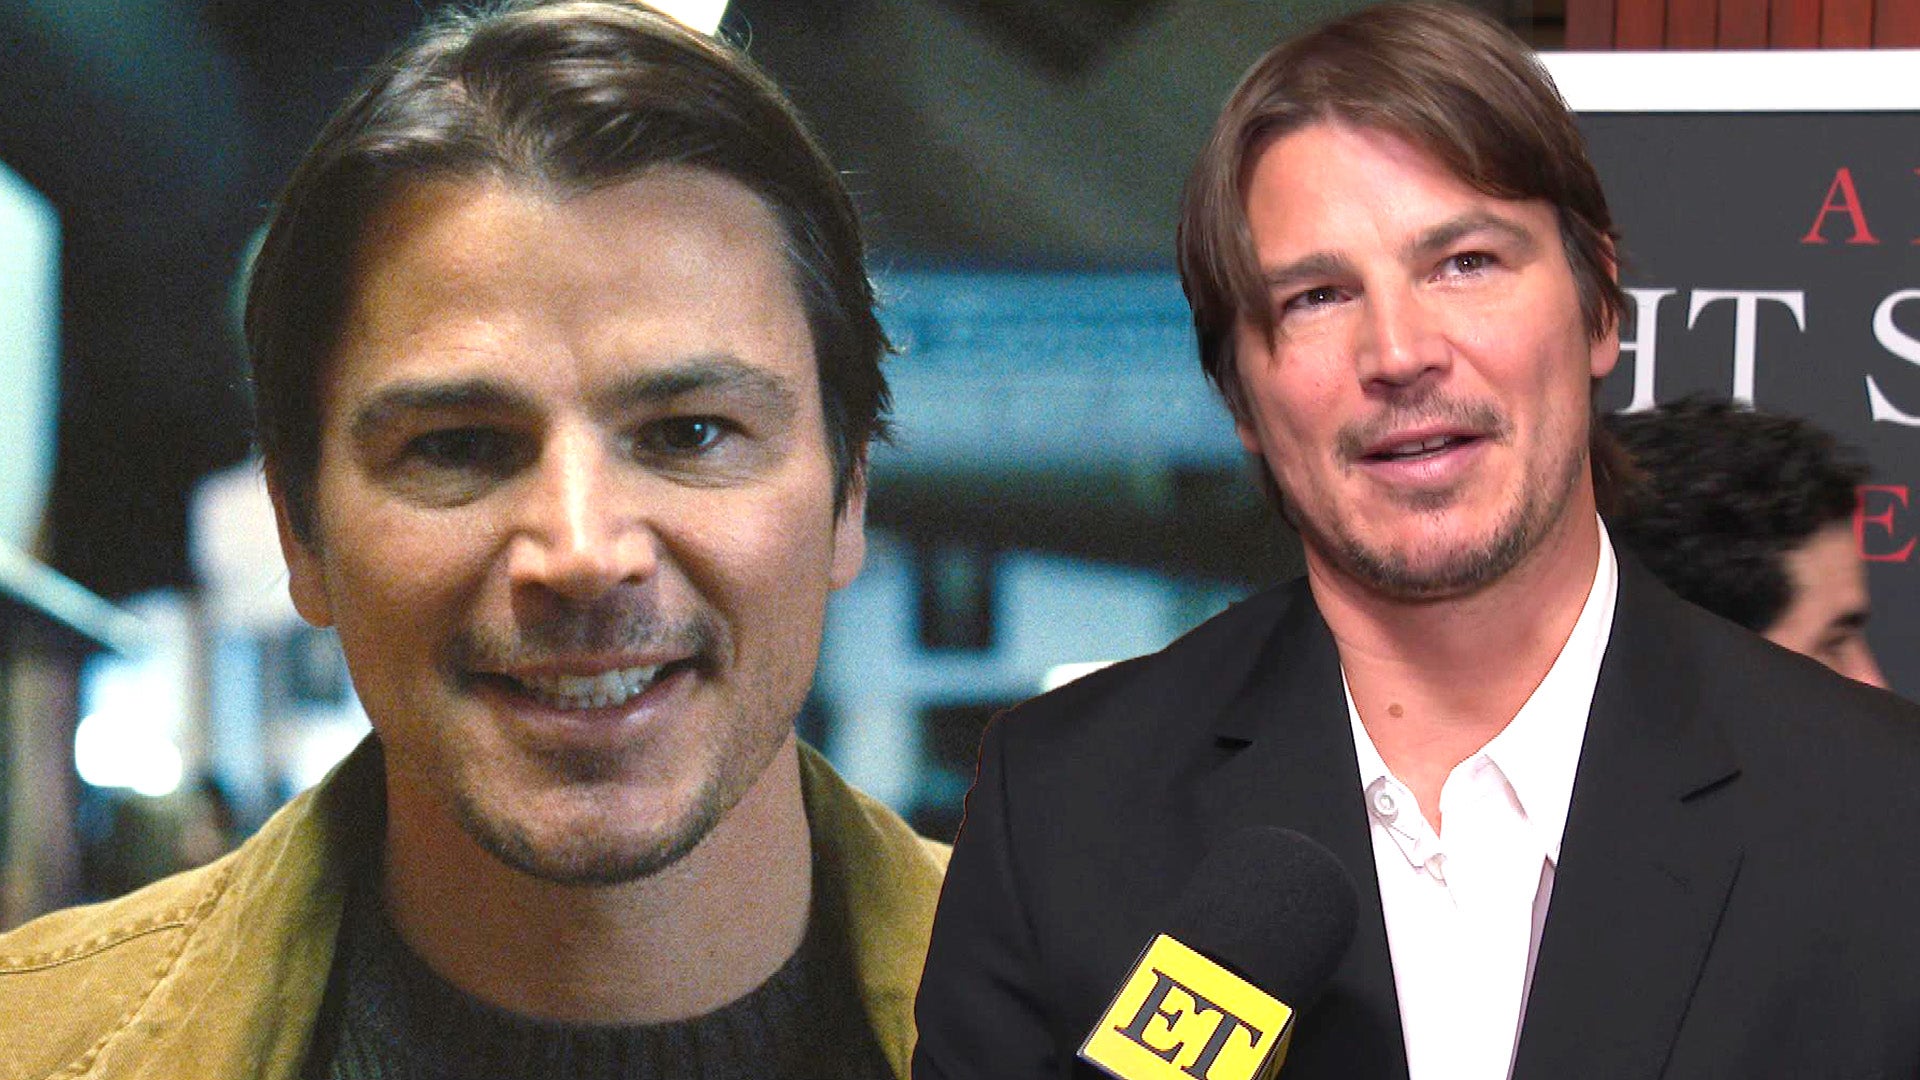 Josh Hartnett ‘Wouldn’t Want to Play’ His ‘Trap’ Character ‘Every Day’ (Exclusive)